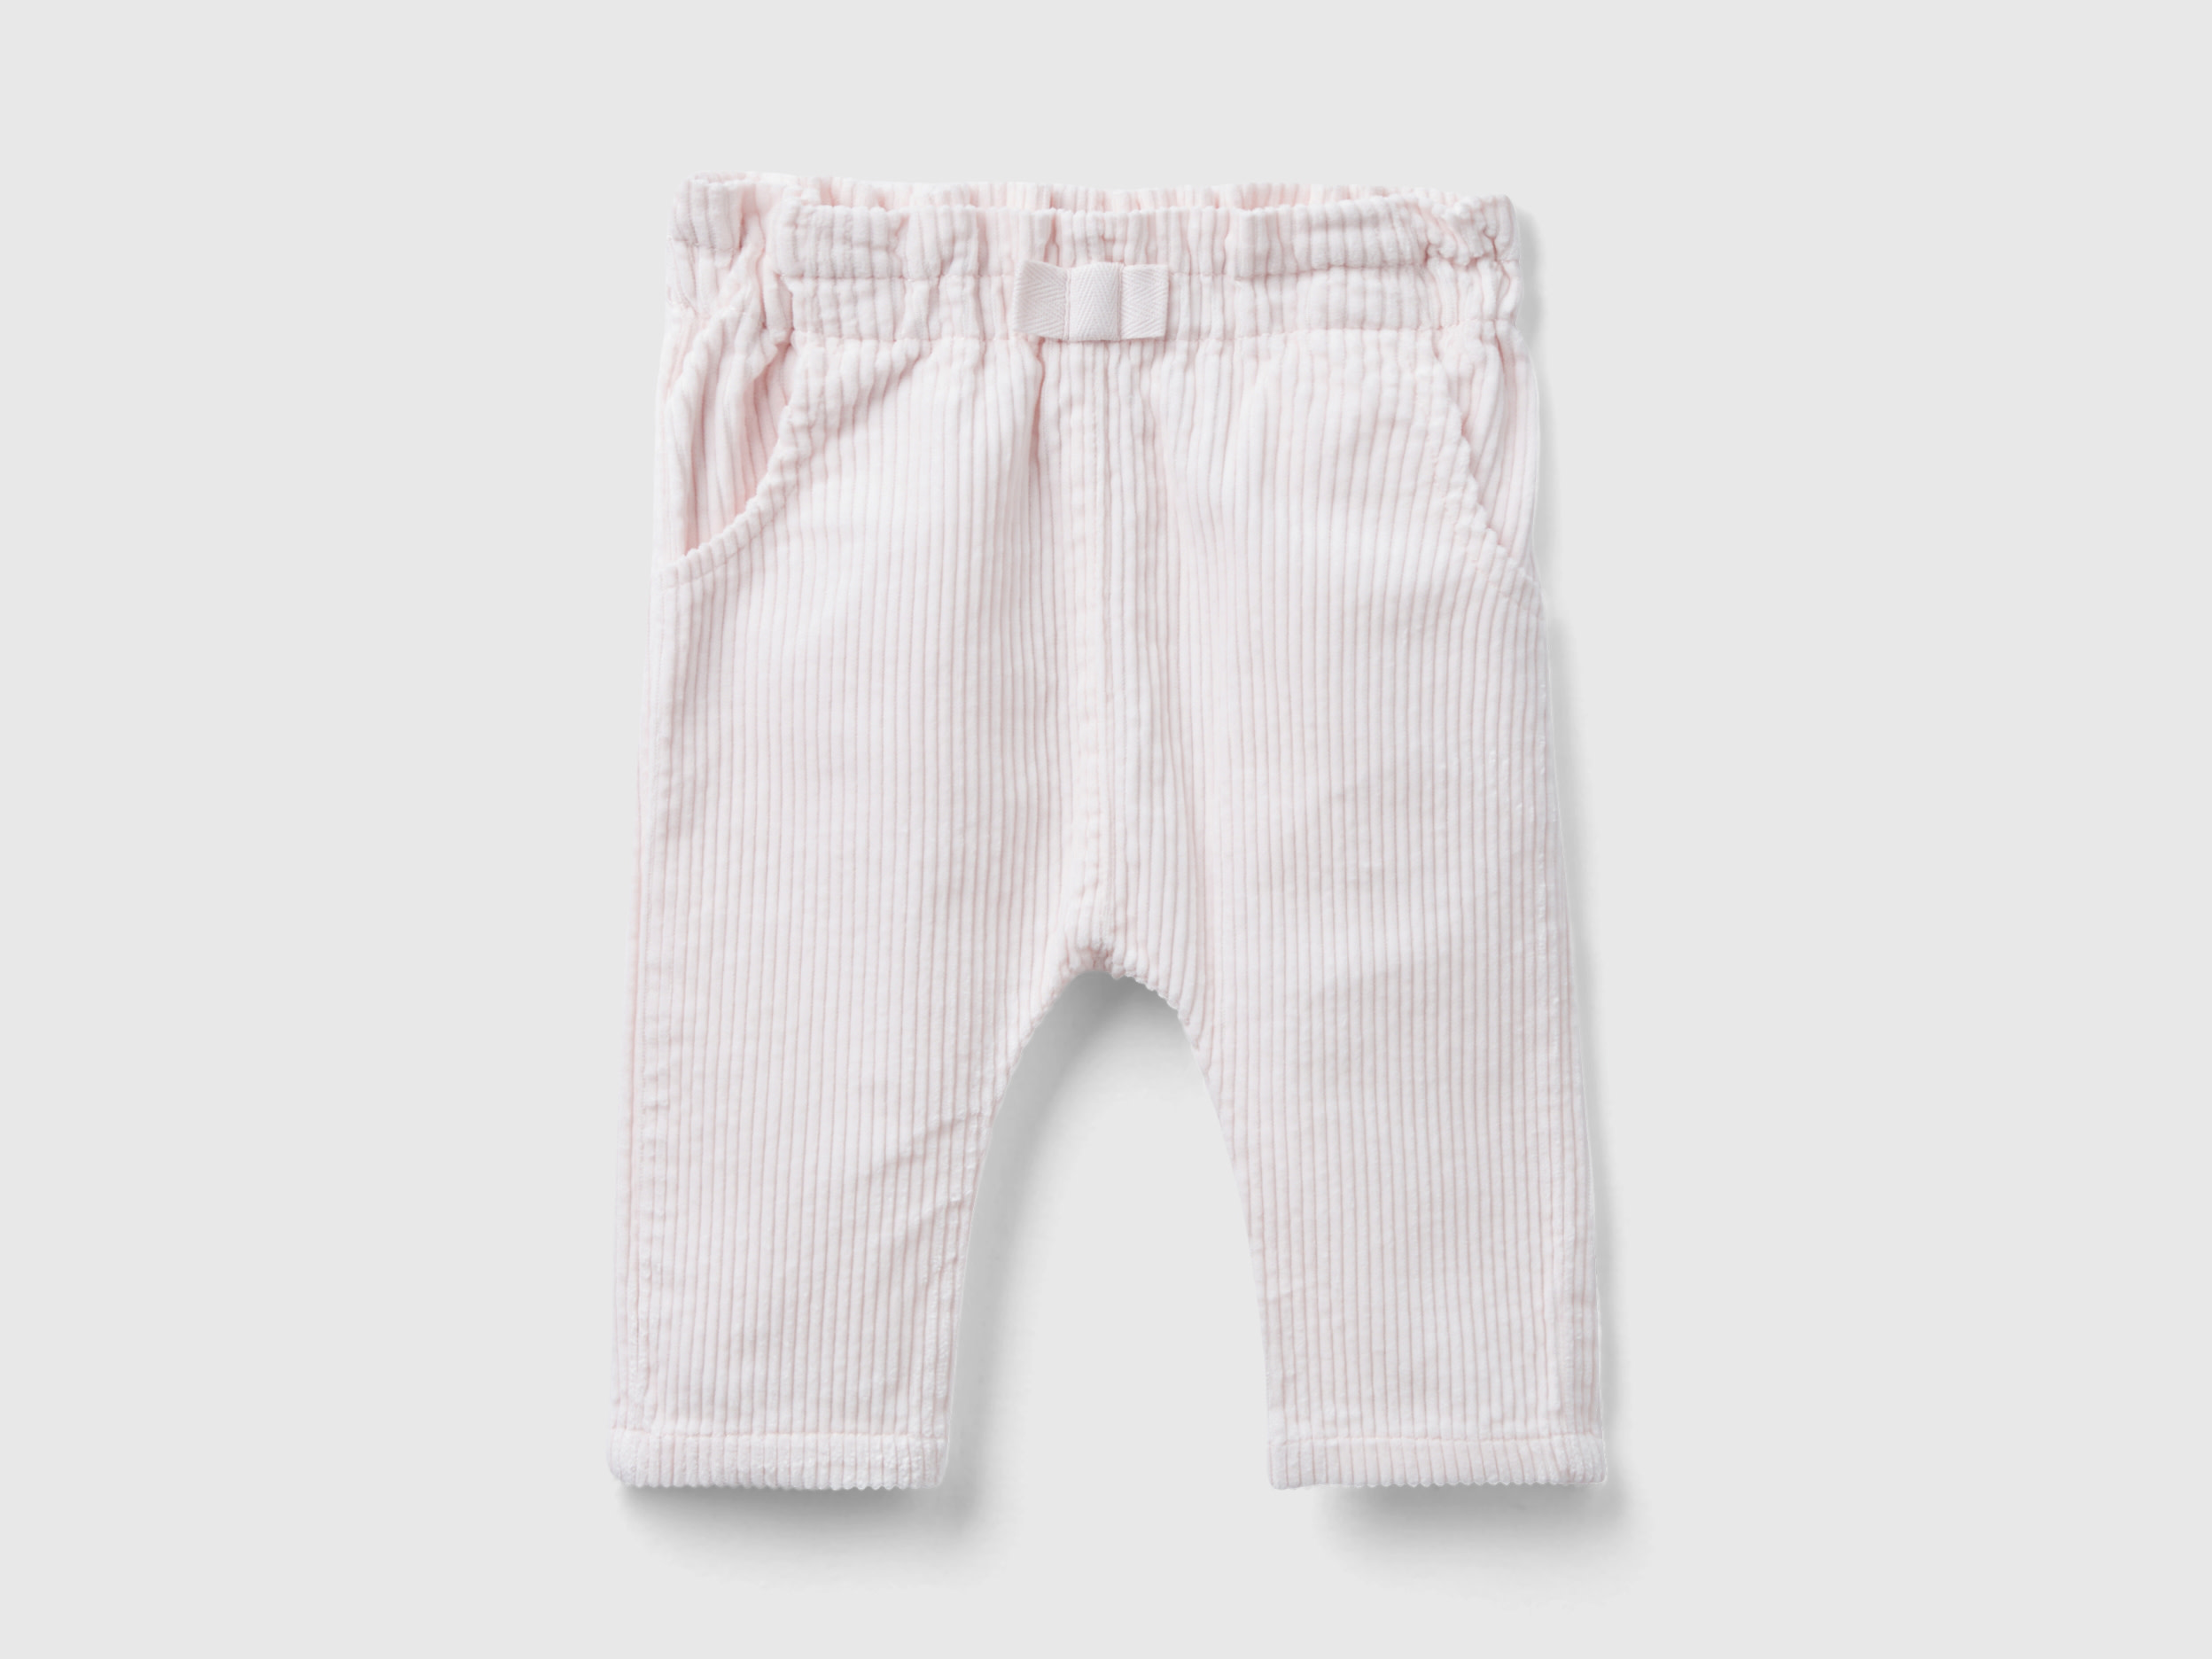 Benetton, Paperbag Corduroy Trousers, size 6-9, Soft Pink, Kids